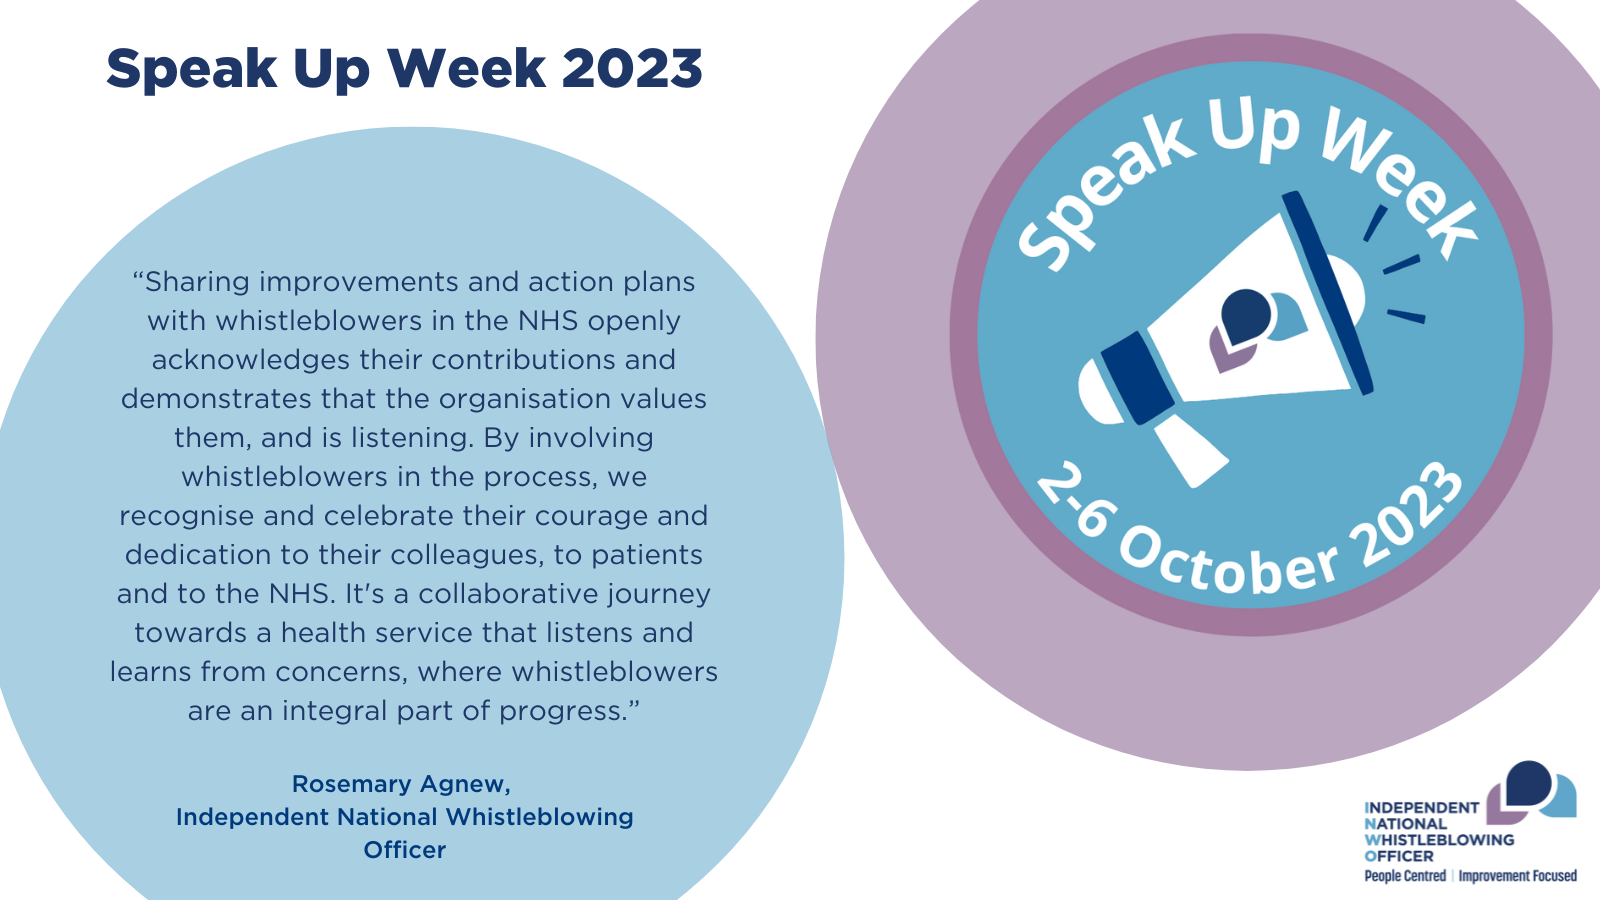 A statement from the INWO, Rosemary Agnew: Sharing improvements and action plans with whistleblowers in the NHS openly acknowledges their contributions and demonstrates that the organisation values them, and is listening. By involving whistleblowers in the process, we recognise and celebrate their courage and dedication to their colleagues, to patients and to the NHS. It's a collaborative journey towards a health service that listens and learns from concerns, where whistleblowers are an integral part of progress.